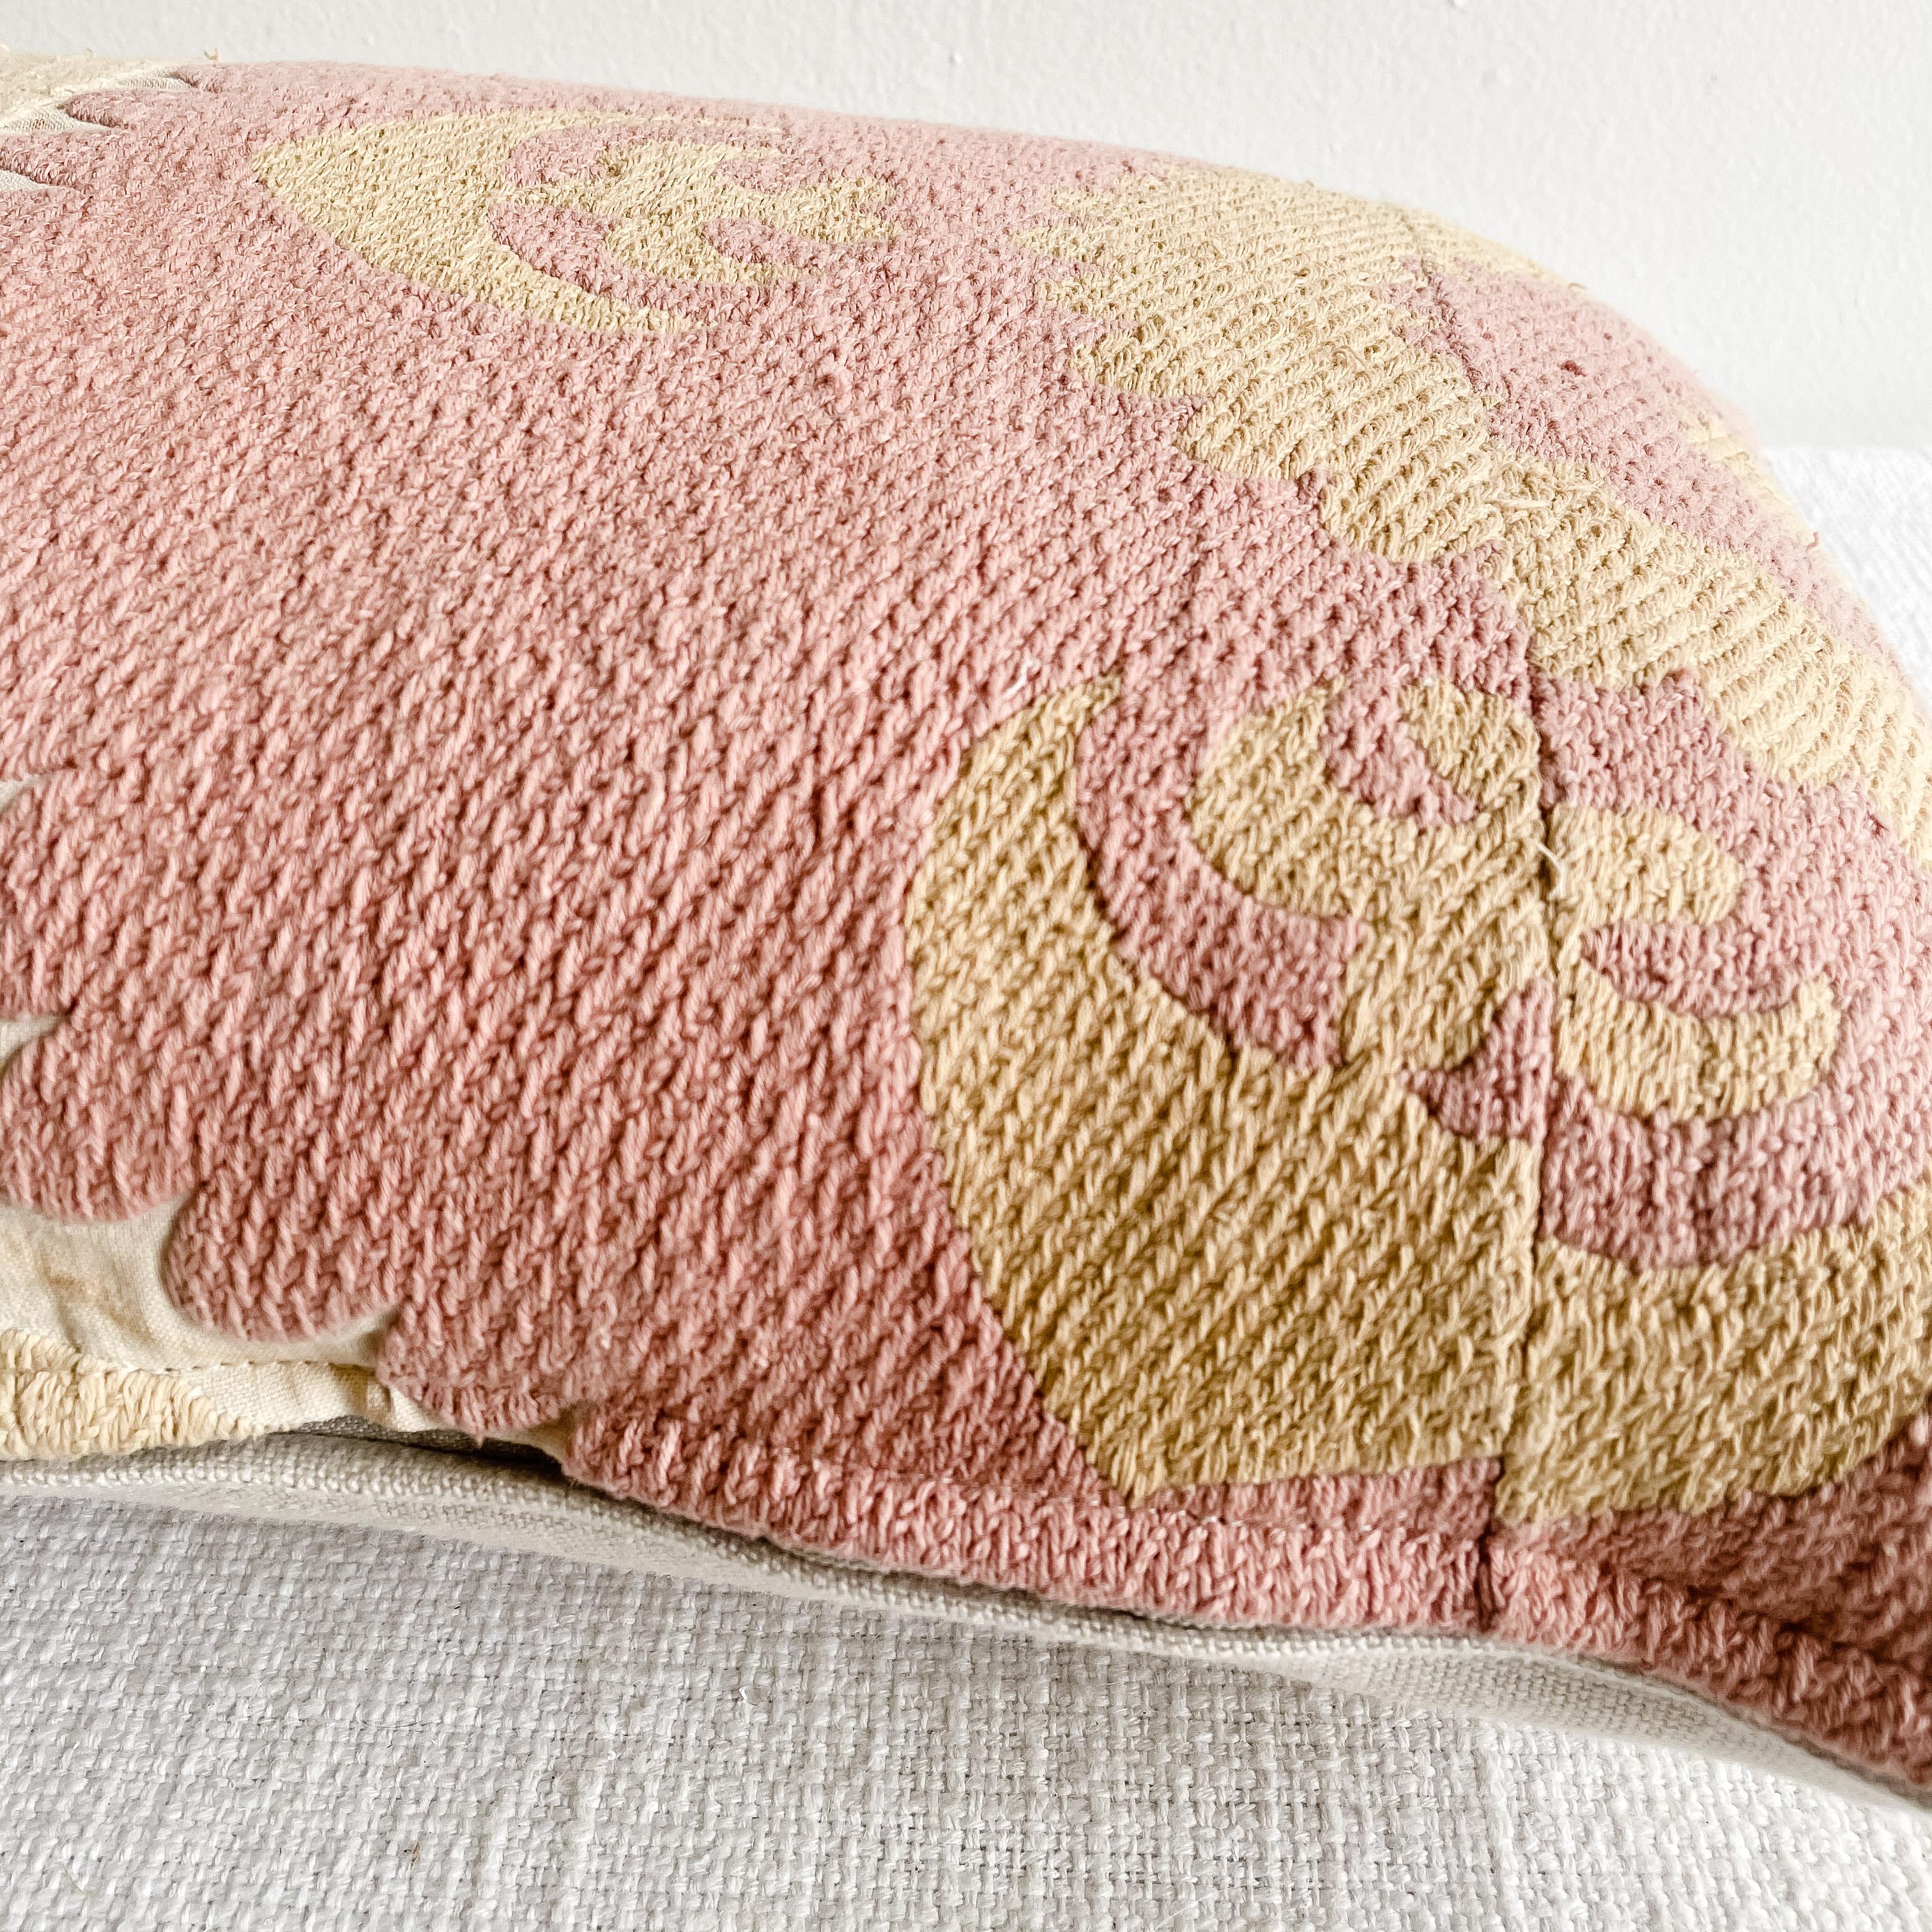 Linen Vintage Pink and Tan Embroidered Suzani Pillow with Down Feather Insert